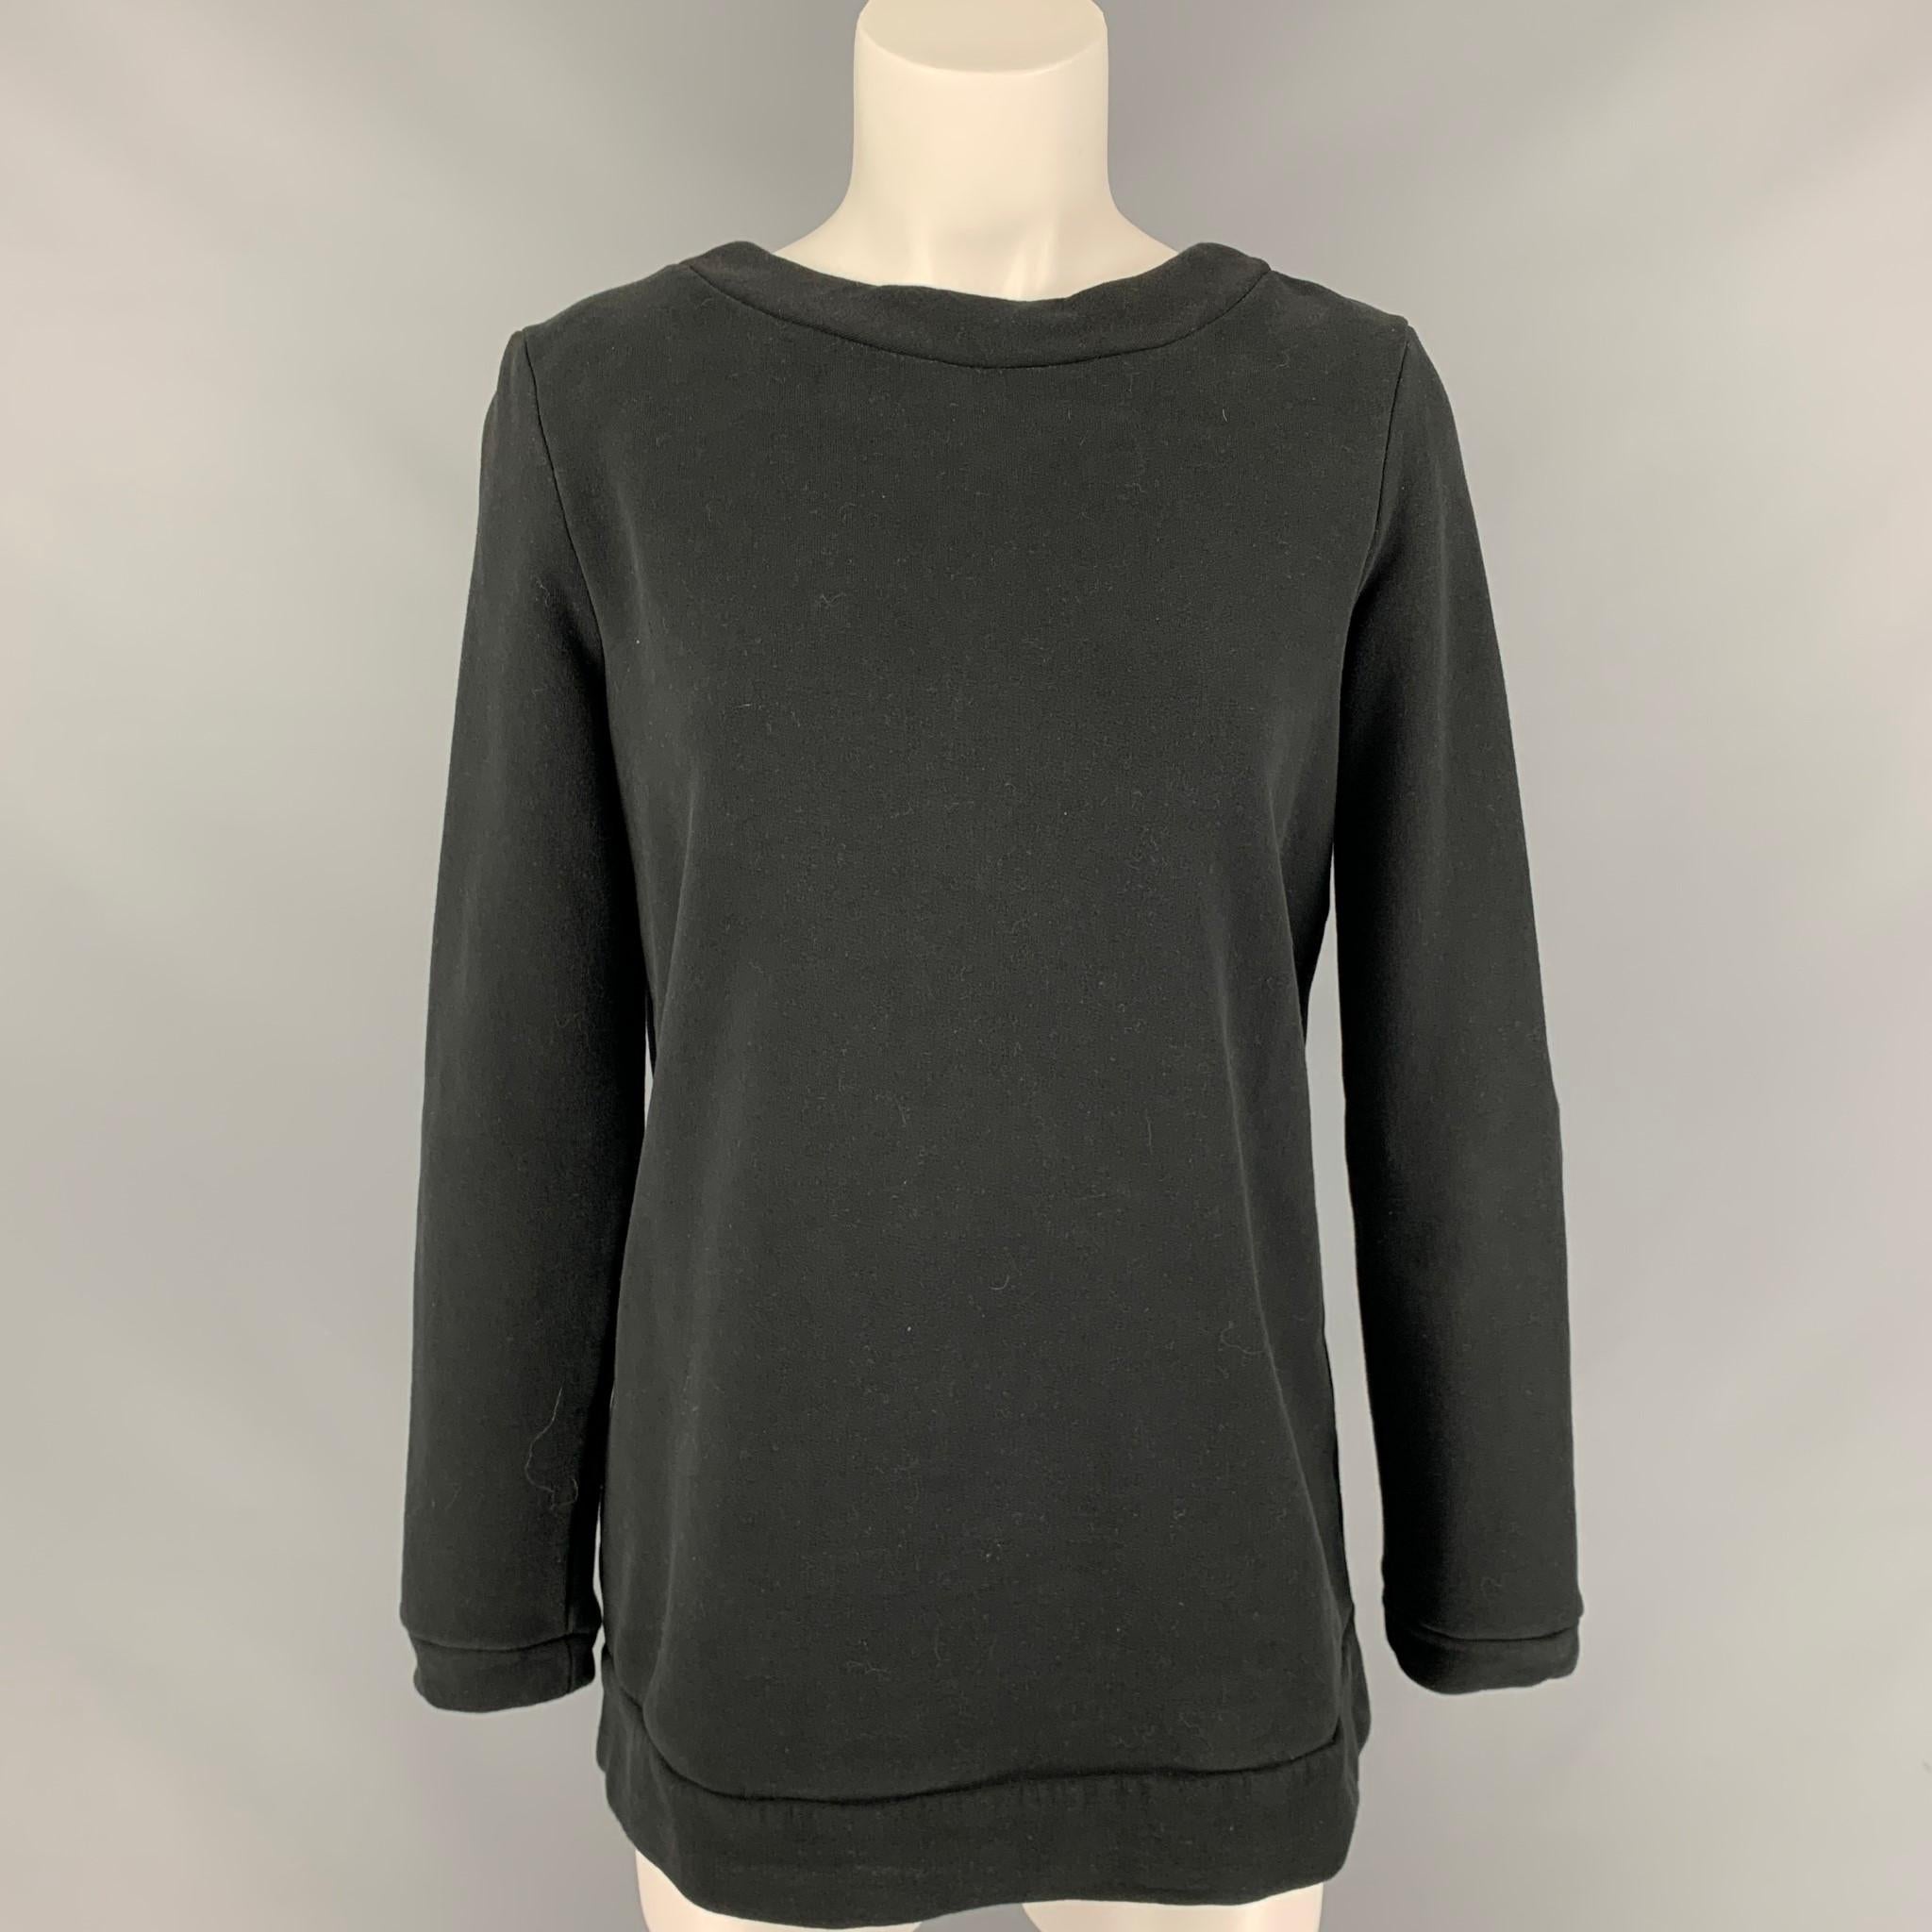 LOVE MOSCHINO sweater comes in a black cotton / polyester featuring back brass zipper details and a scoop neck. First display picture would be the back of the sweater.

Very Good Pre-Owned Condition.
Marked: D 38 / GB 10 / F 38 / USA 6 / I